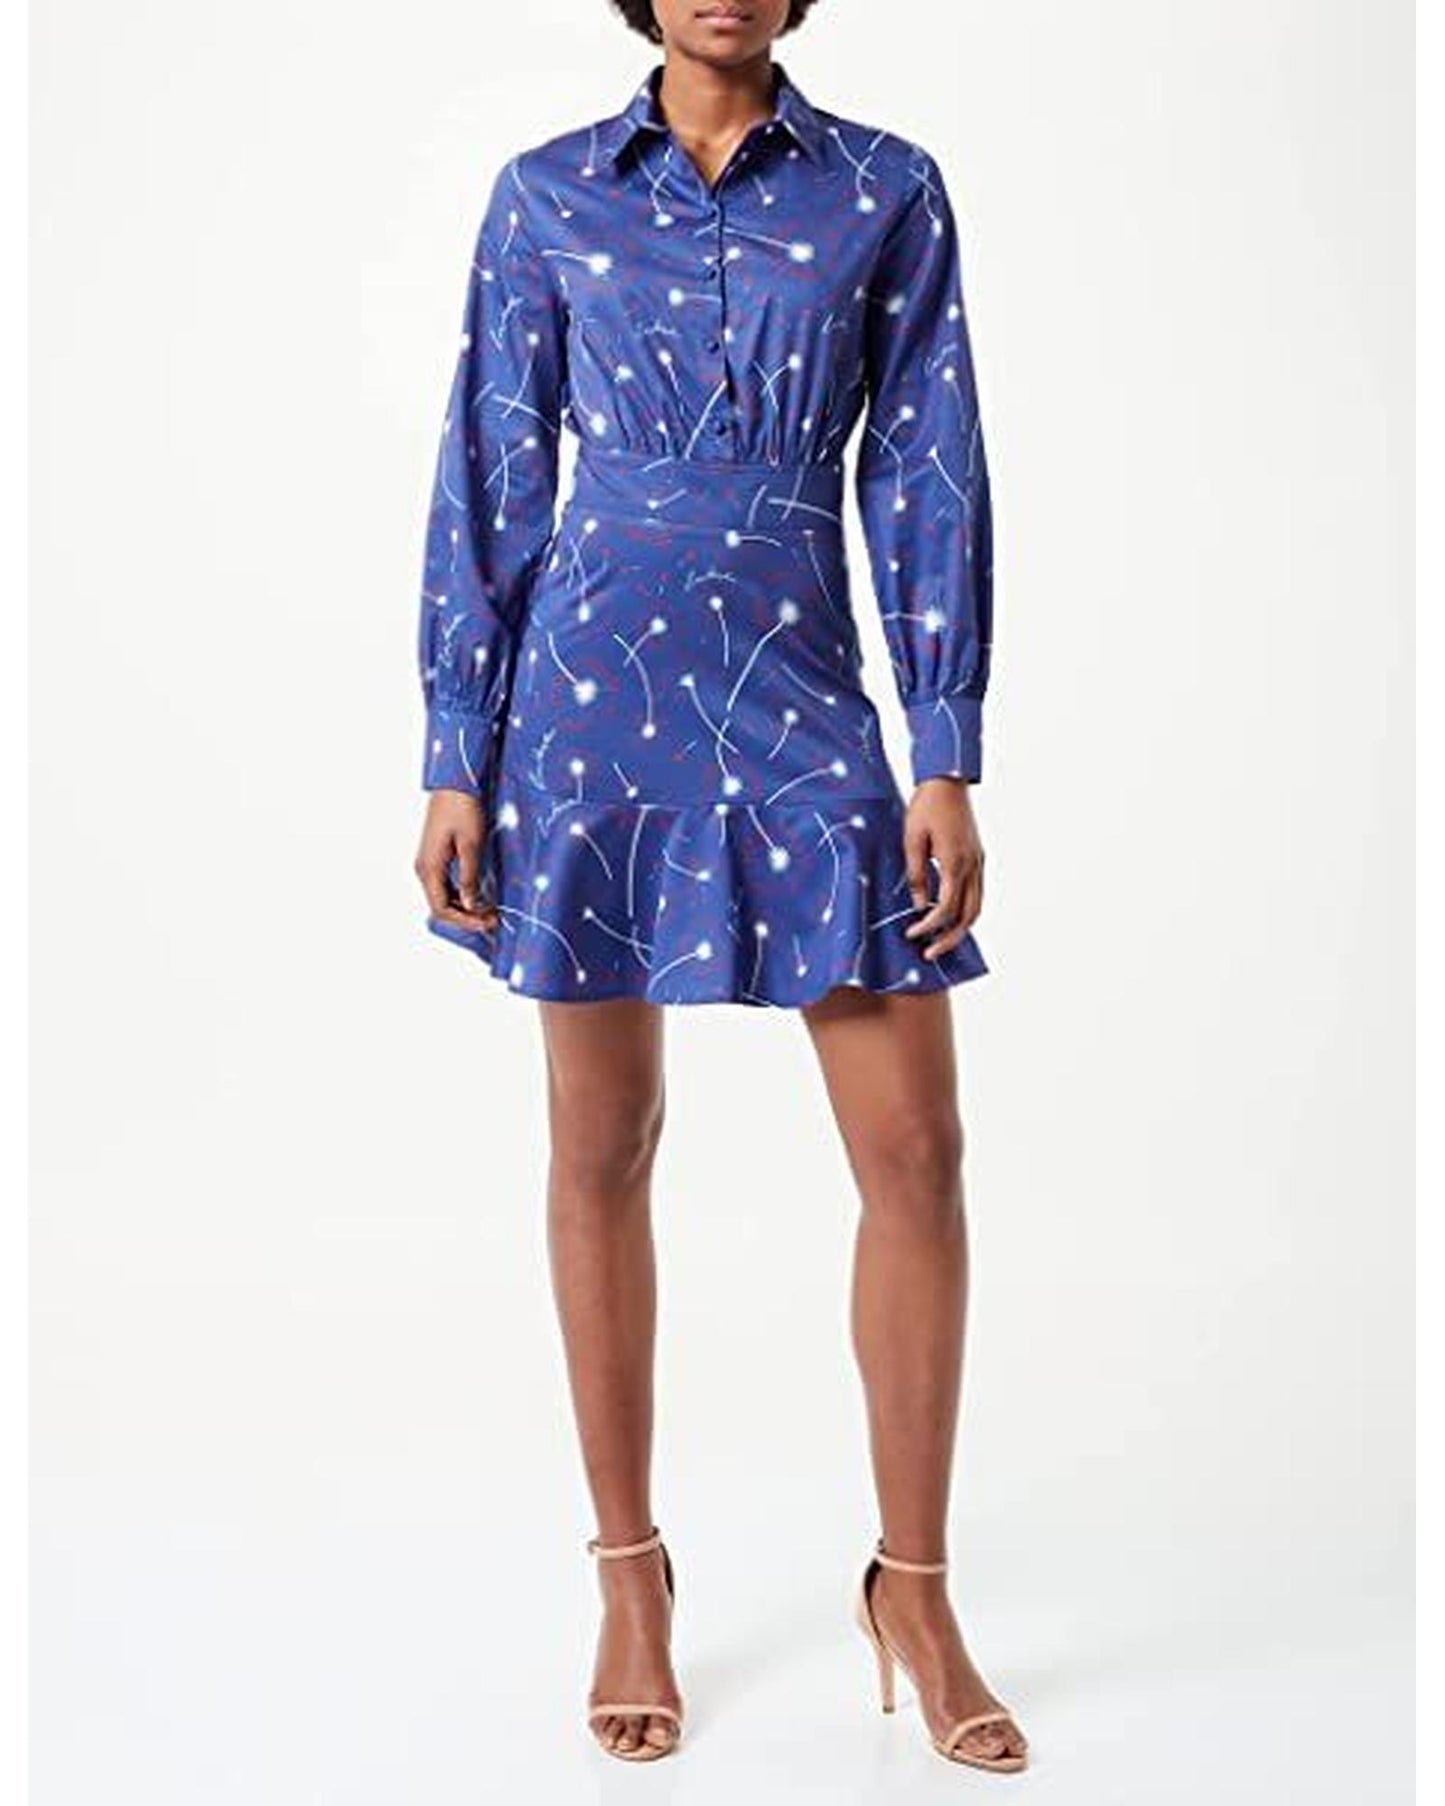 Abstract Print Shirt Collar Cotton Dress with Long Sleeves 46 IT Women